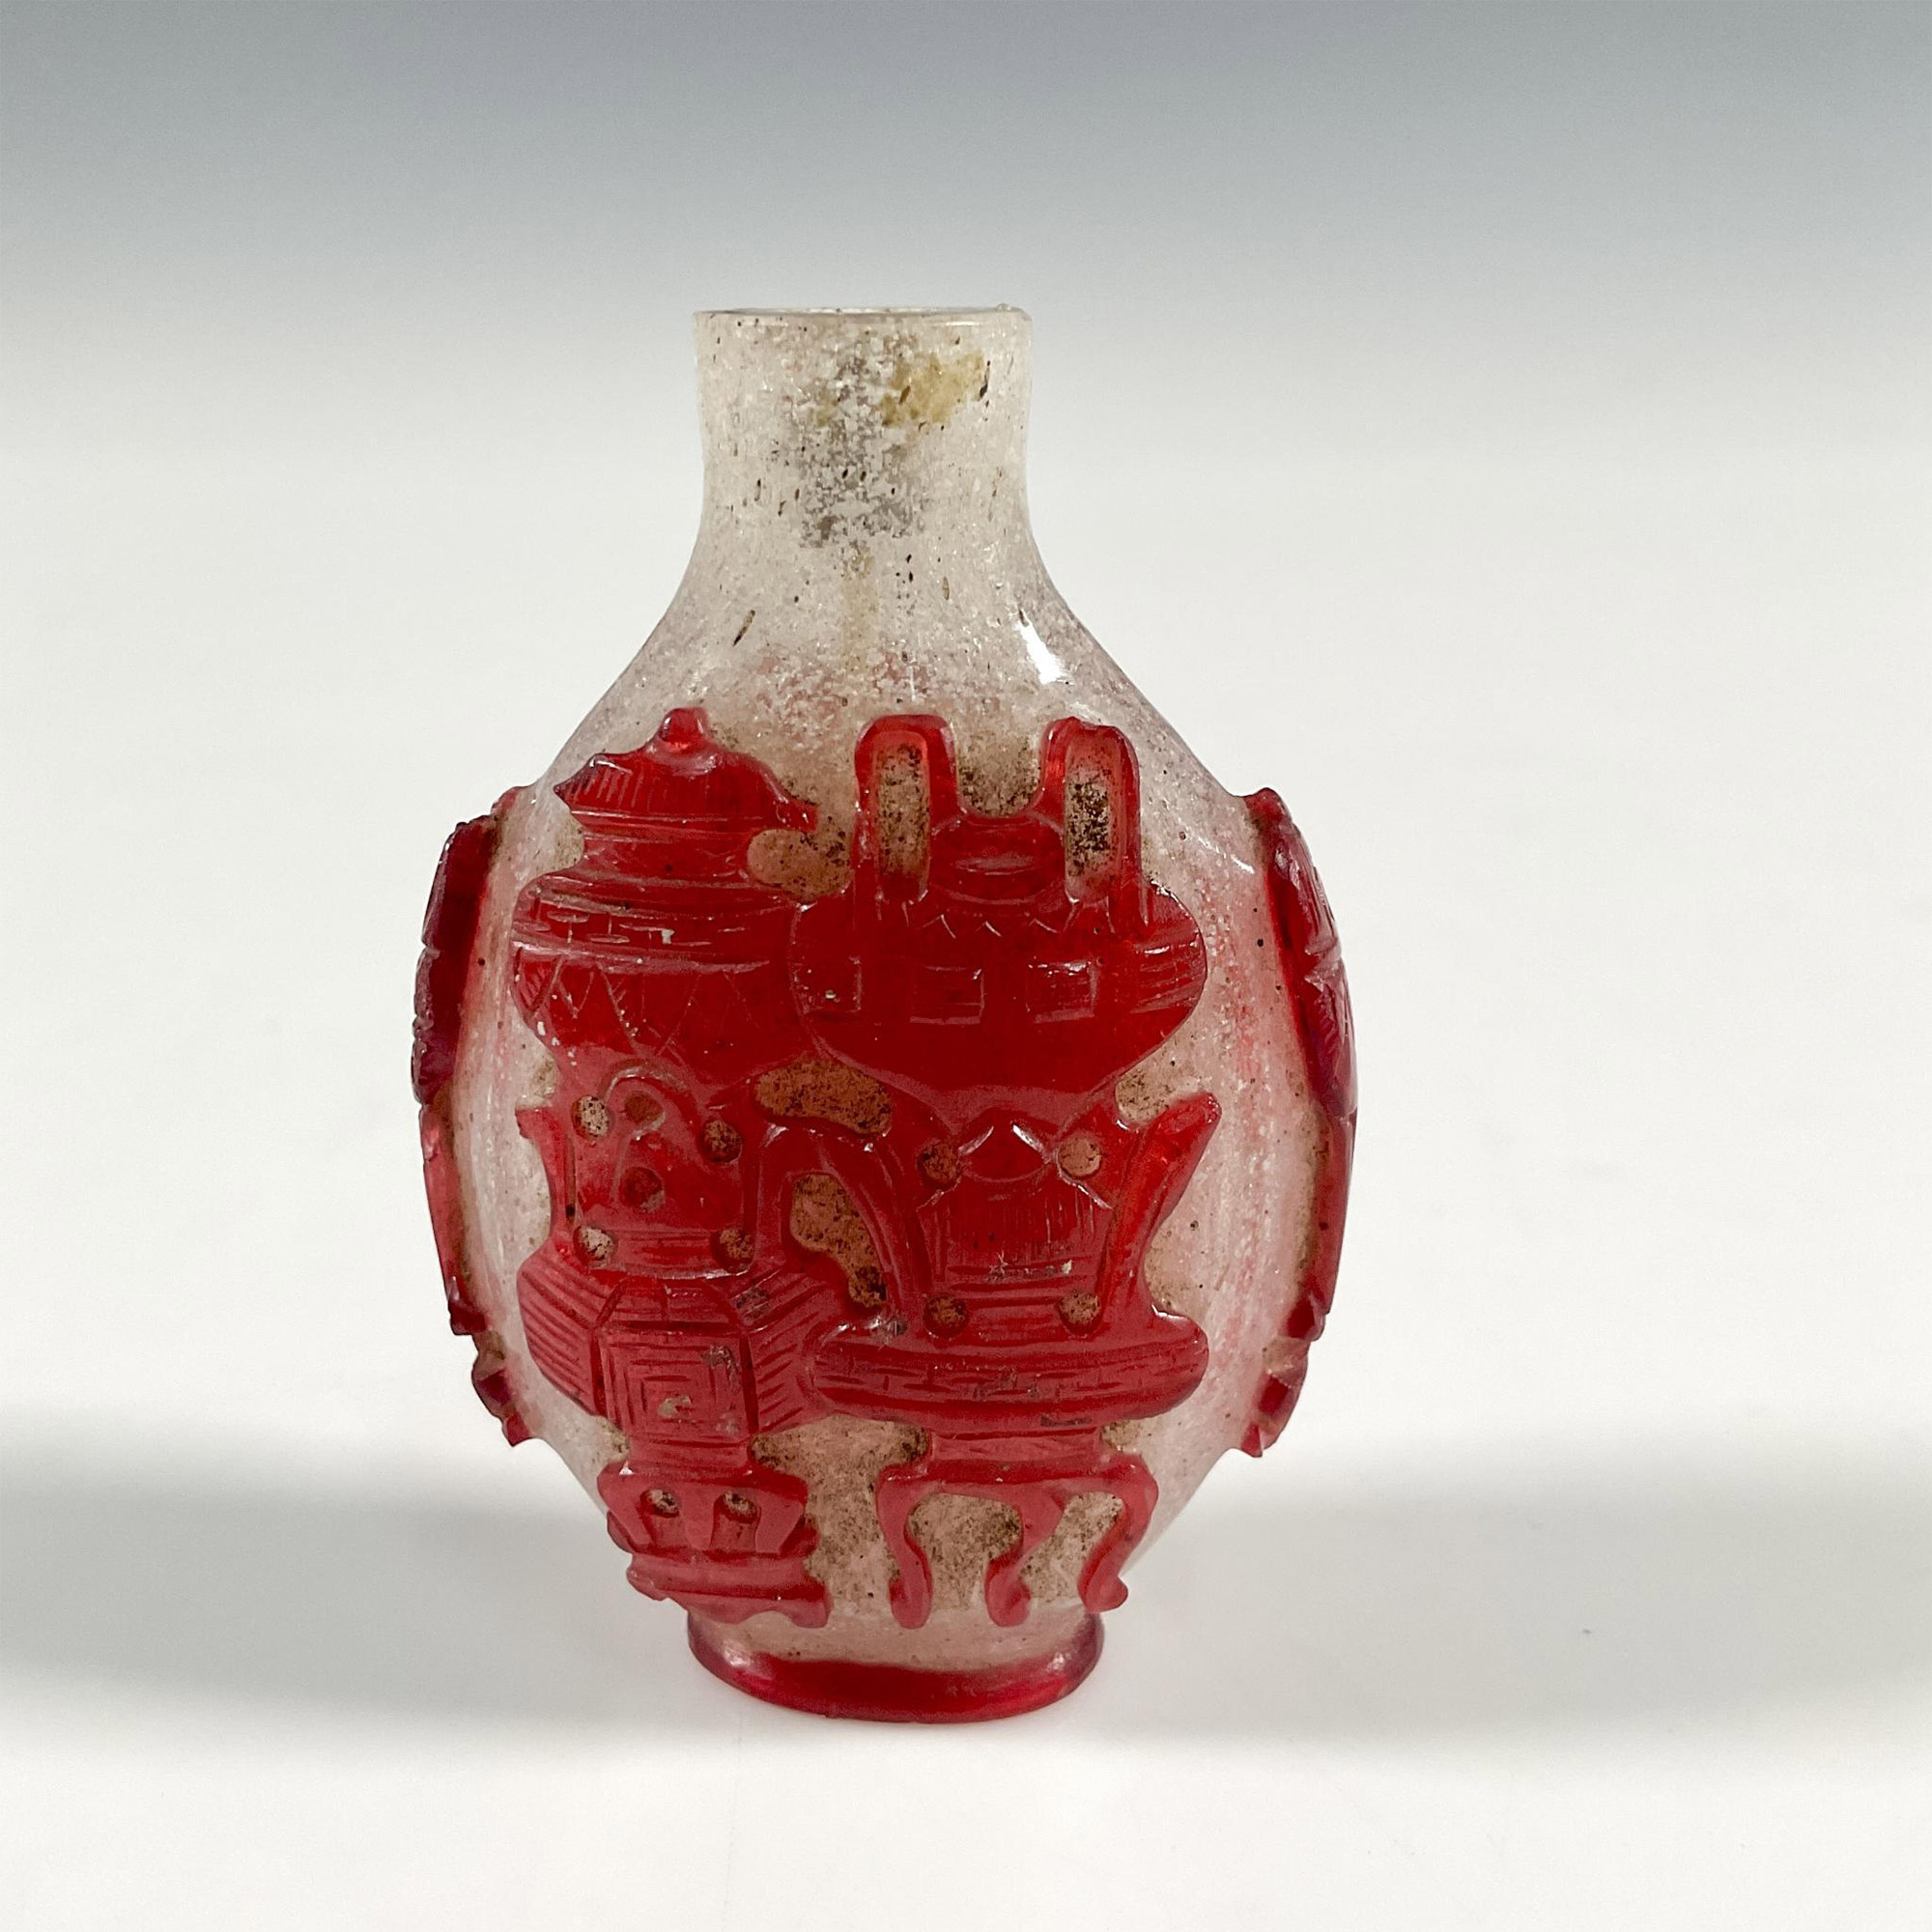 Antique Chinese Ruby Red Glass Overlay Snuff Bottle - Image 2 of 4